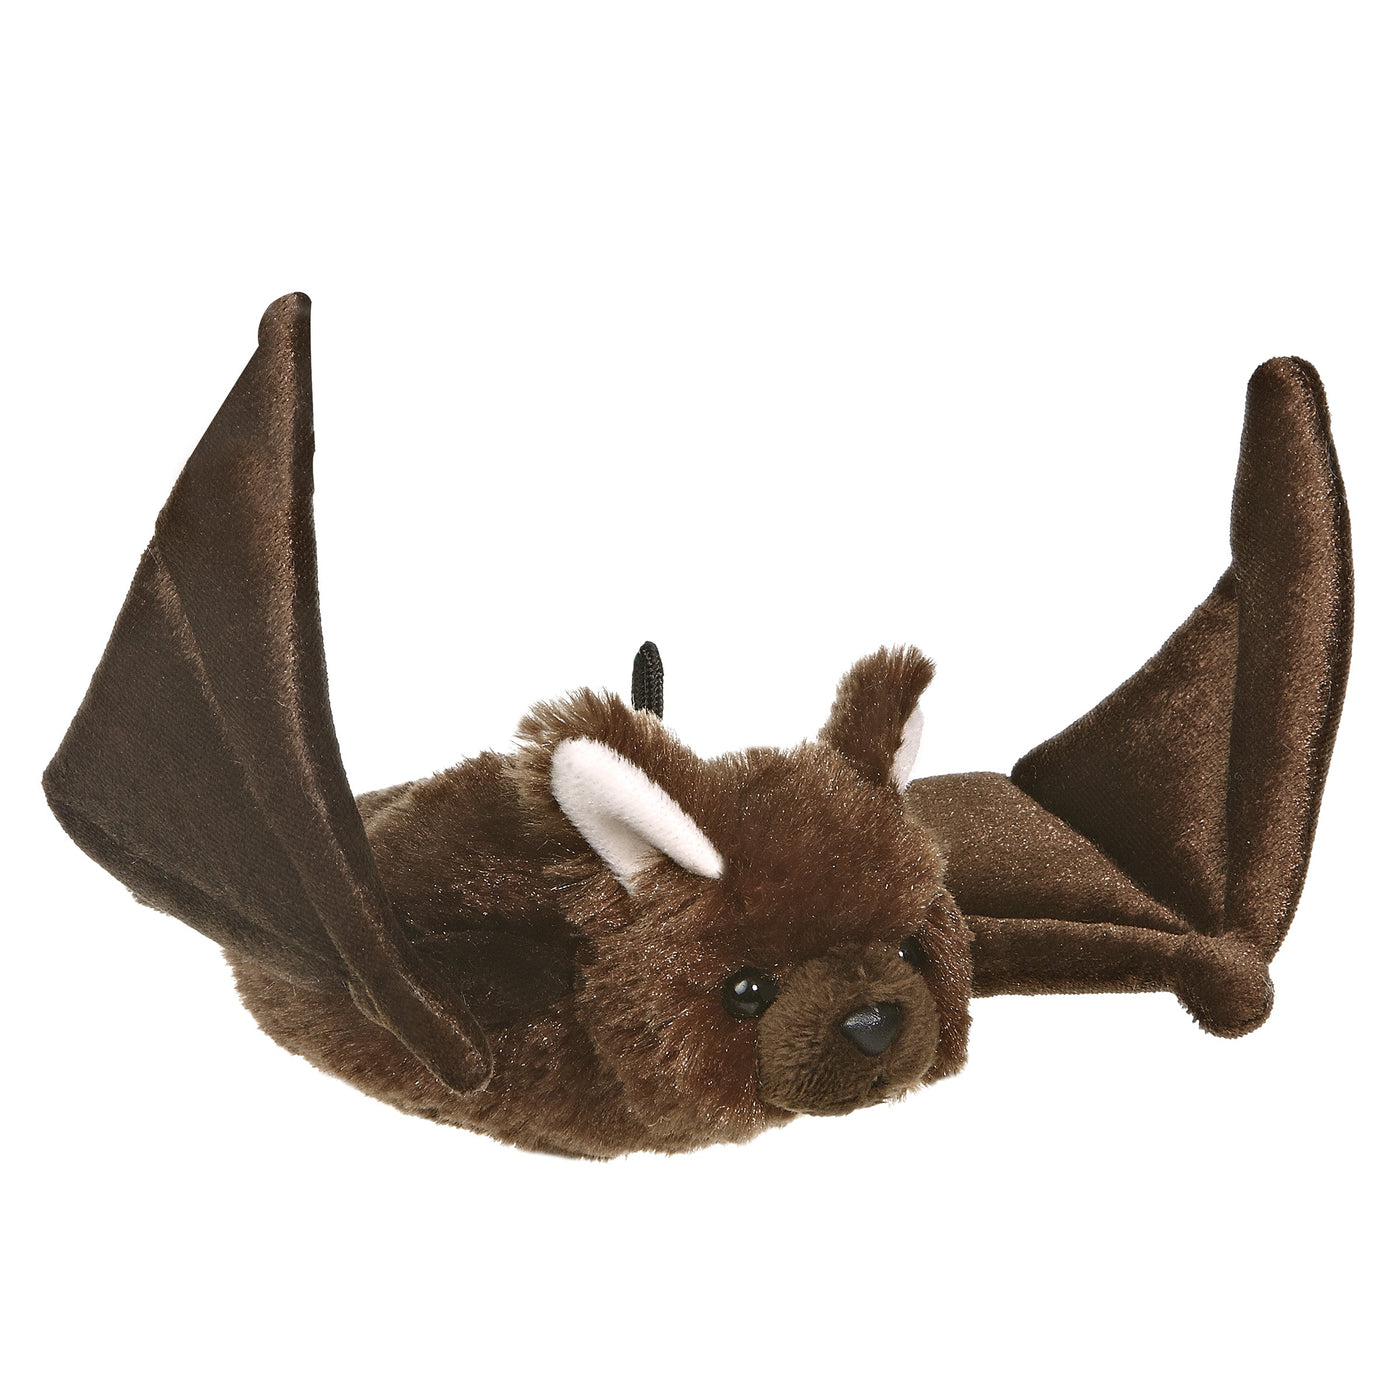 Aurora Flopsy 8" Plush Toy-Home/Giftware-BAT-Kevin's Fine Outdoor Gear & Apparel